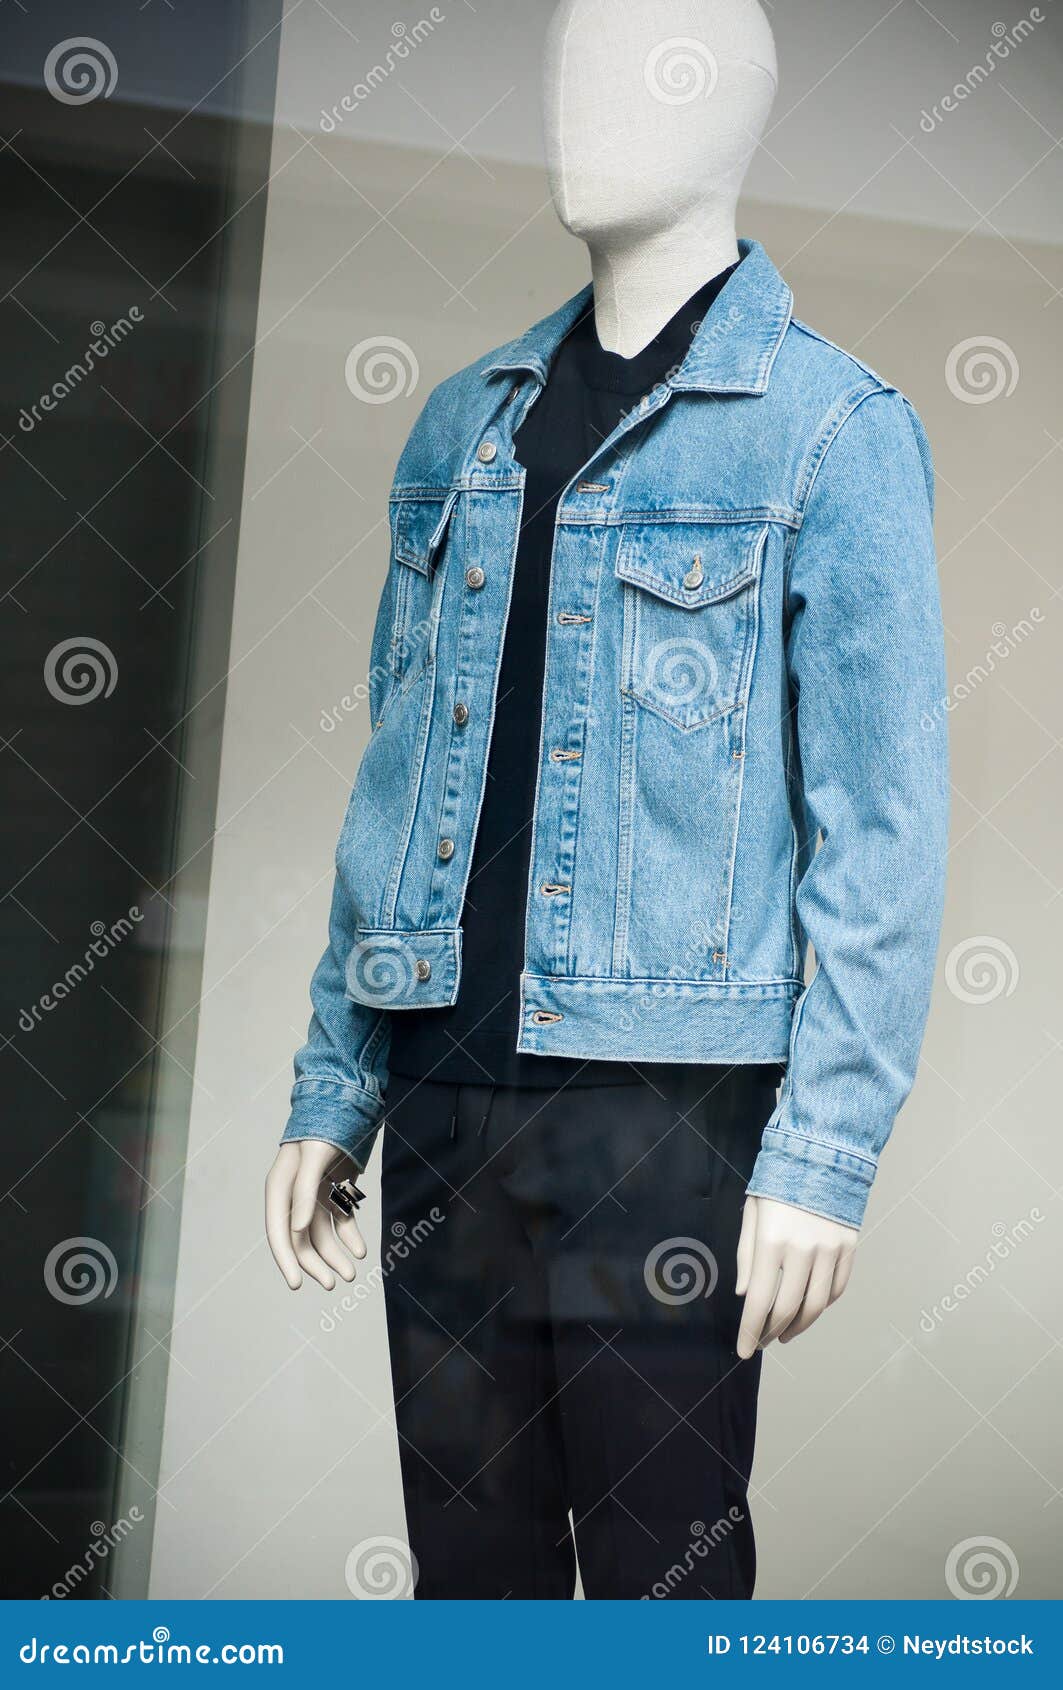 How To Wear A Denim Jacket Style Tips For Guys  Lugako